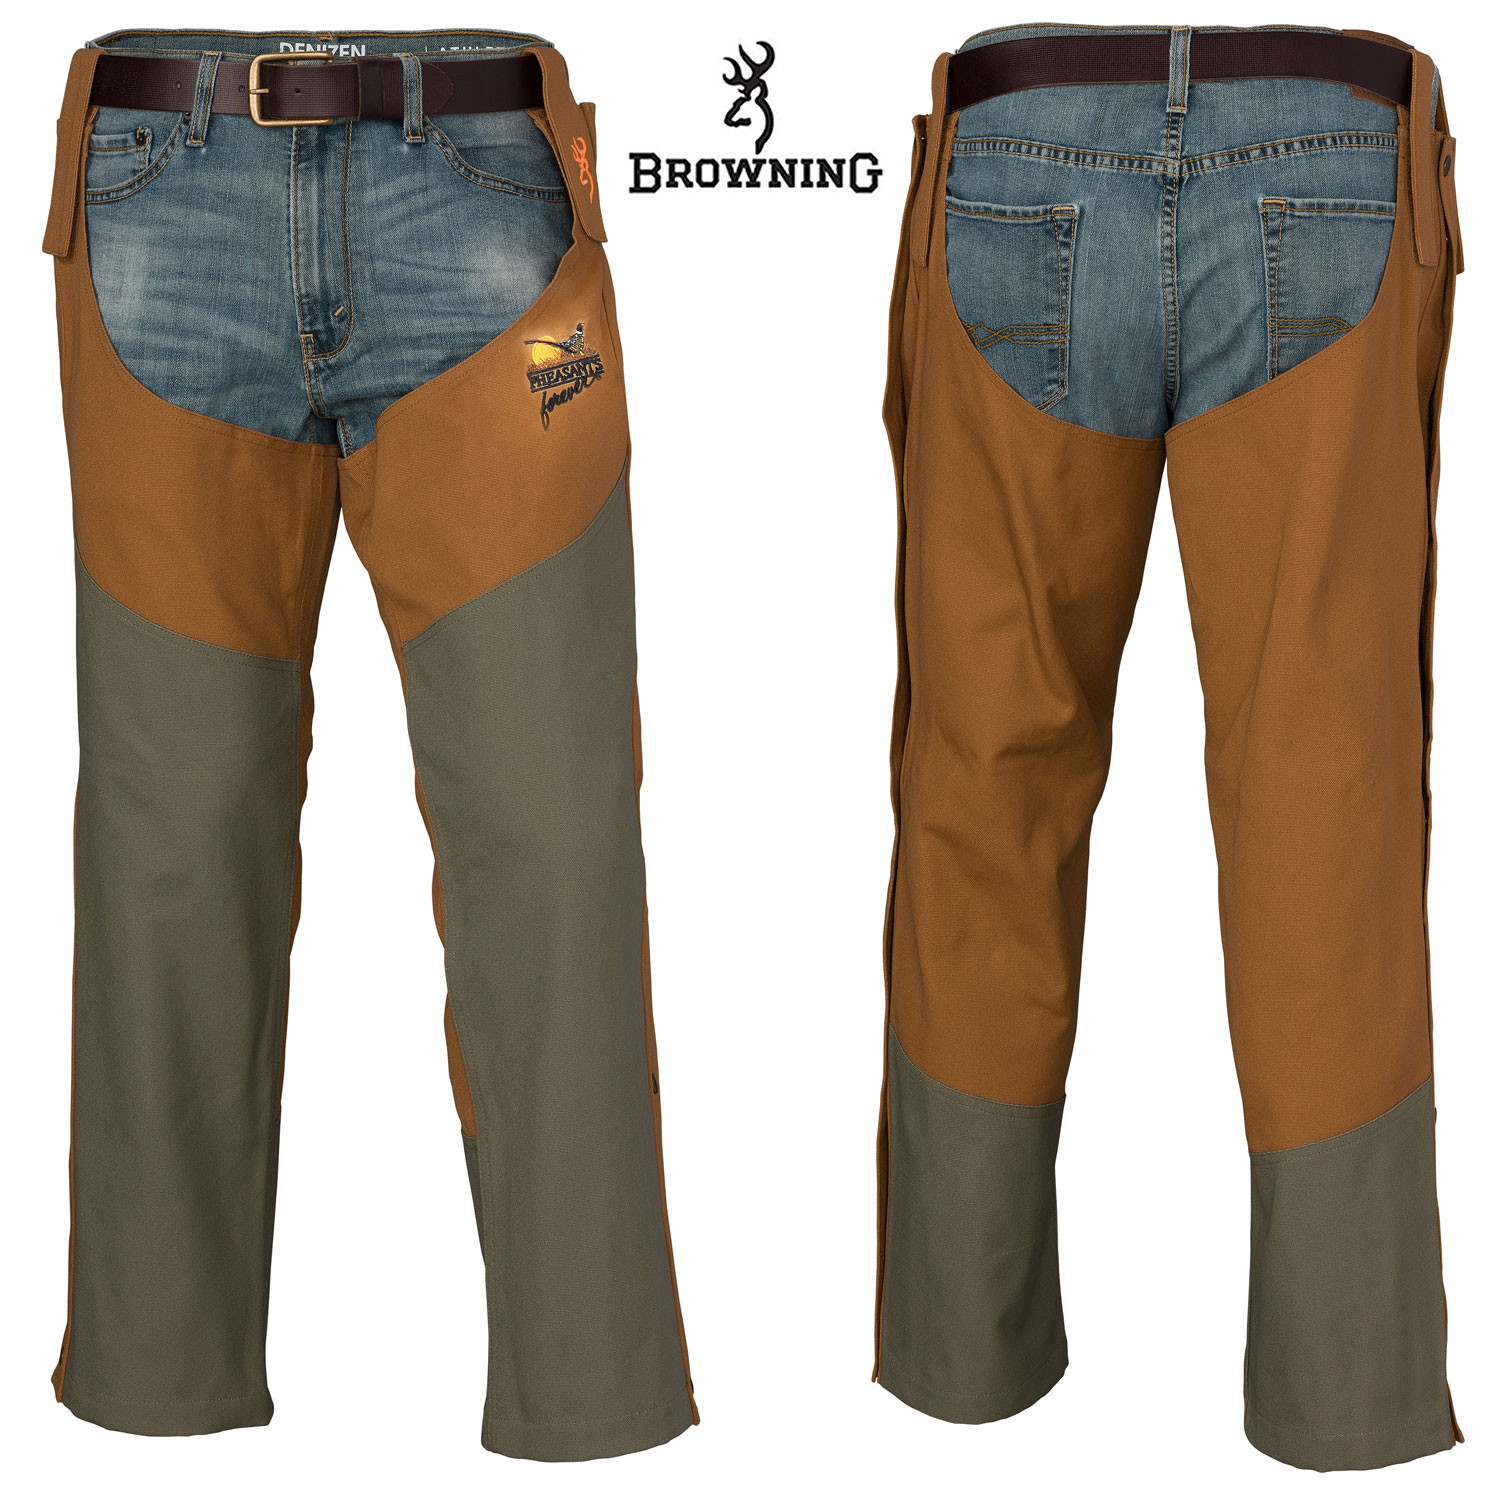 Browning Pheasants Forever Upland Chaps (OSFM) - Regular | Wing Supply